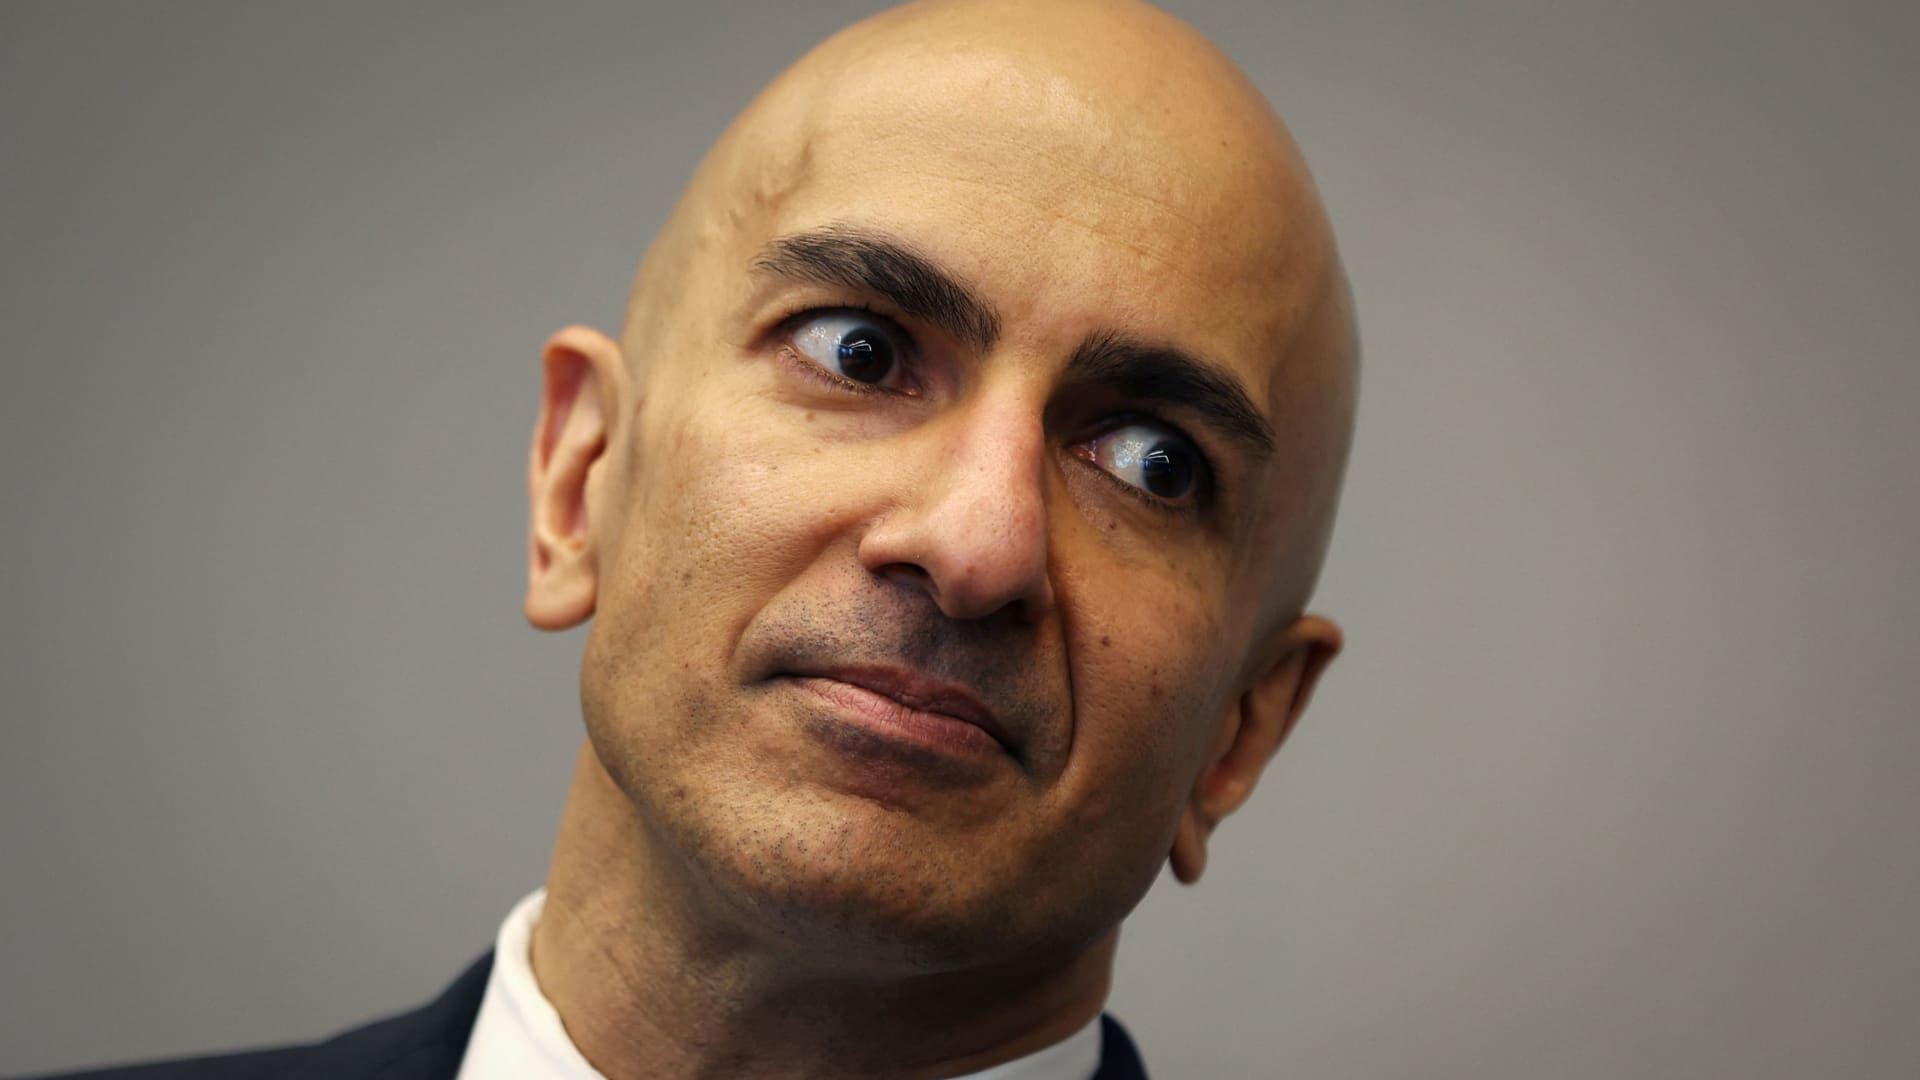 Fed’s Neel Kashkari sees 40% chance of ‘meaningfully increased’ interest rates